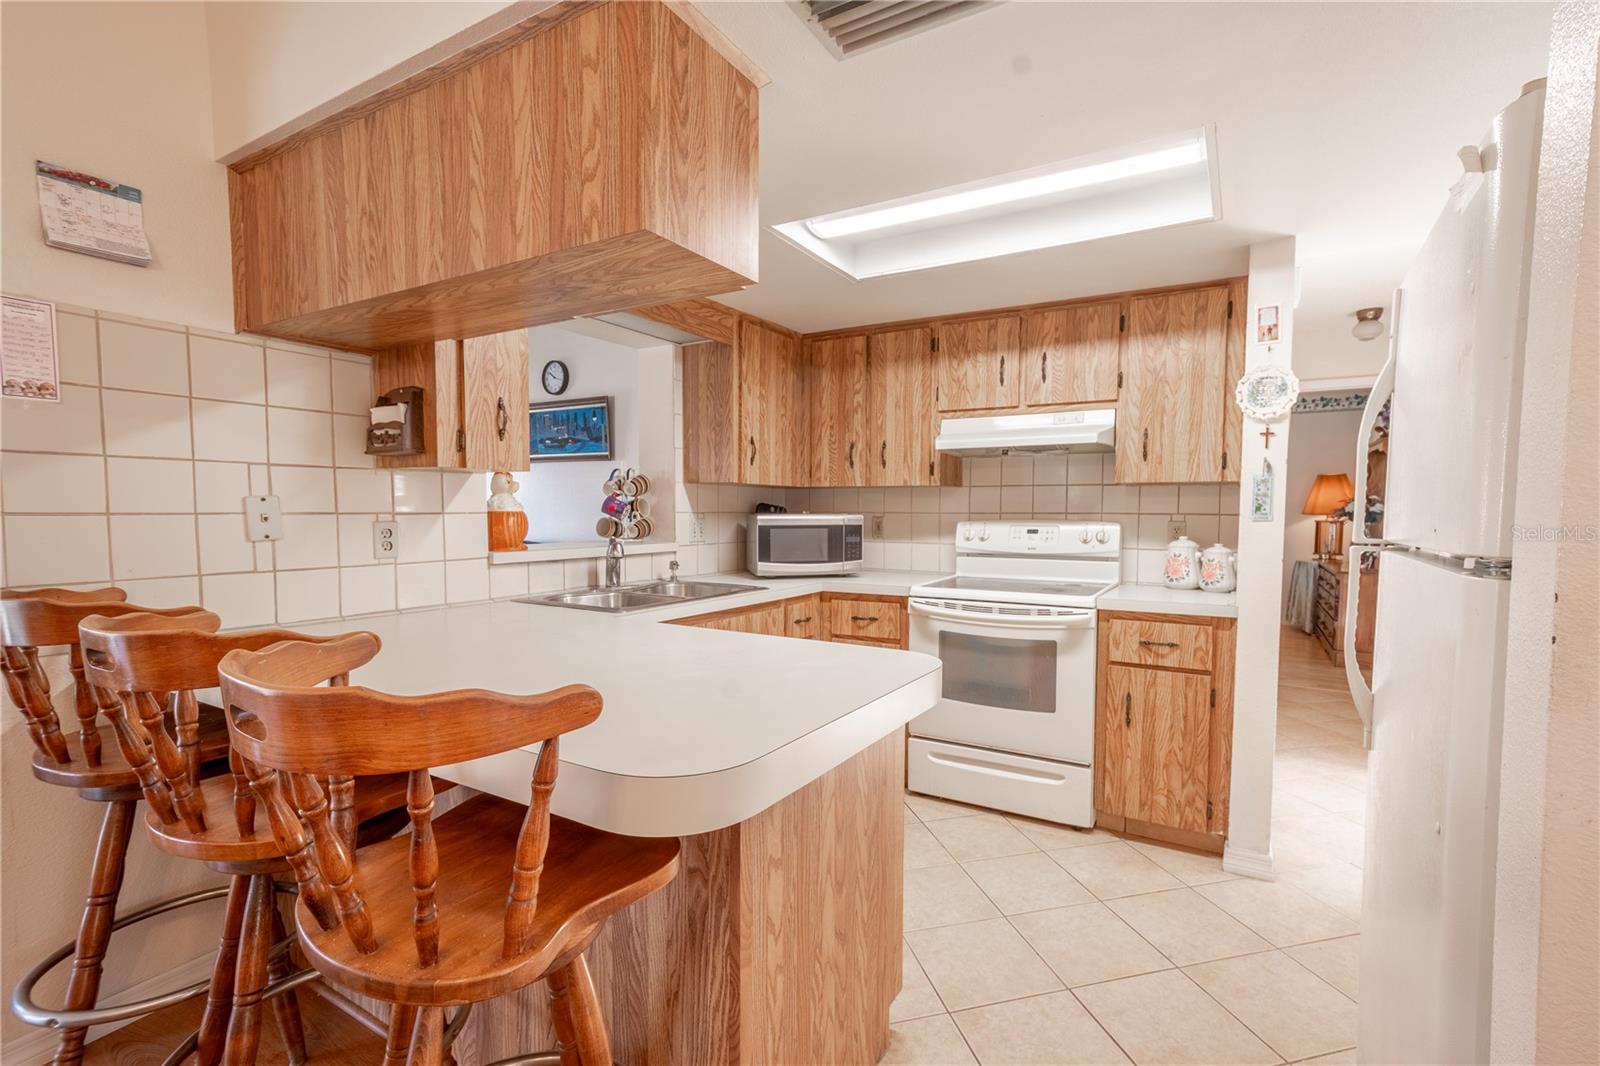 The kitchen offers plenty of counter space and a breakfast bar that seats 3.